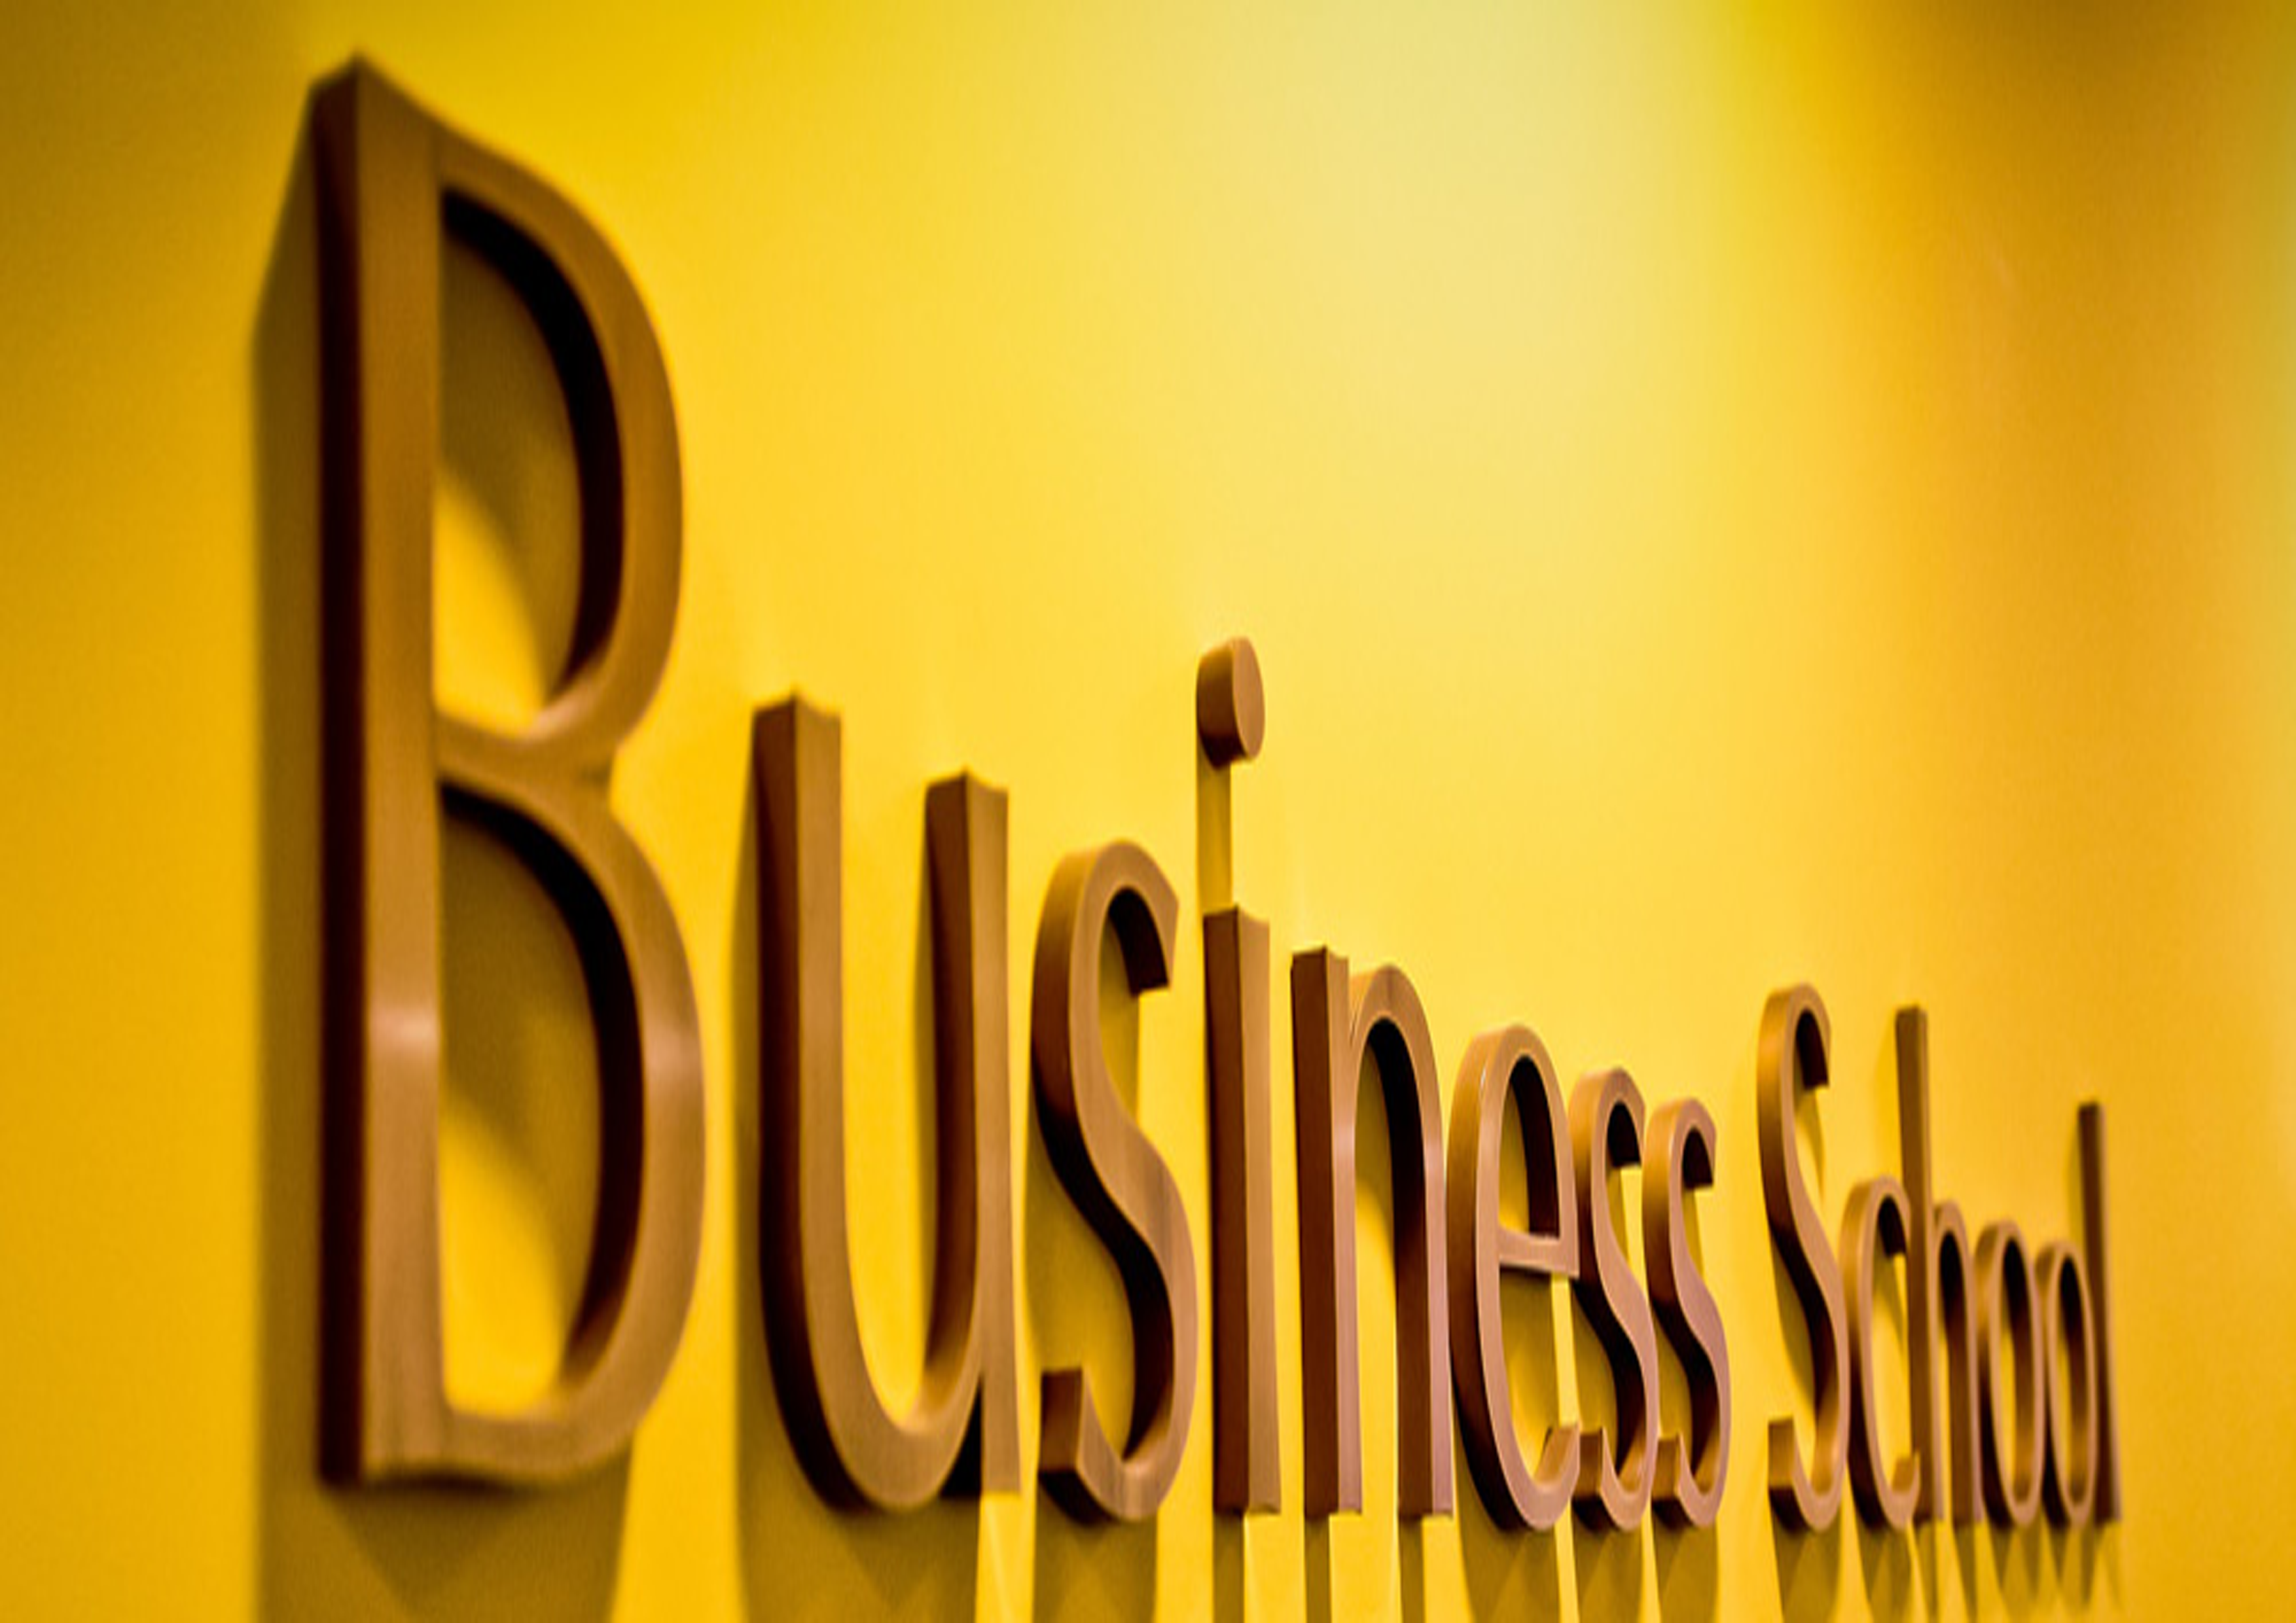 Benefits of Joining Business Schools :-These key points can lead you ahead in Business Management